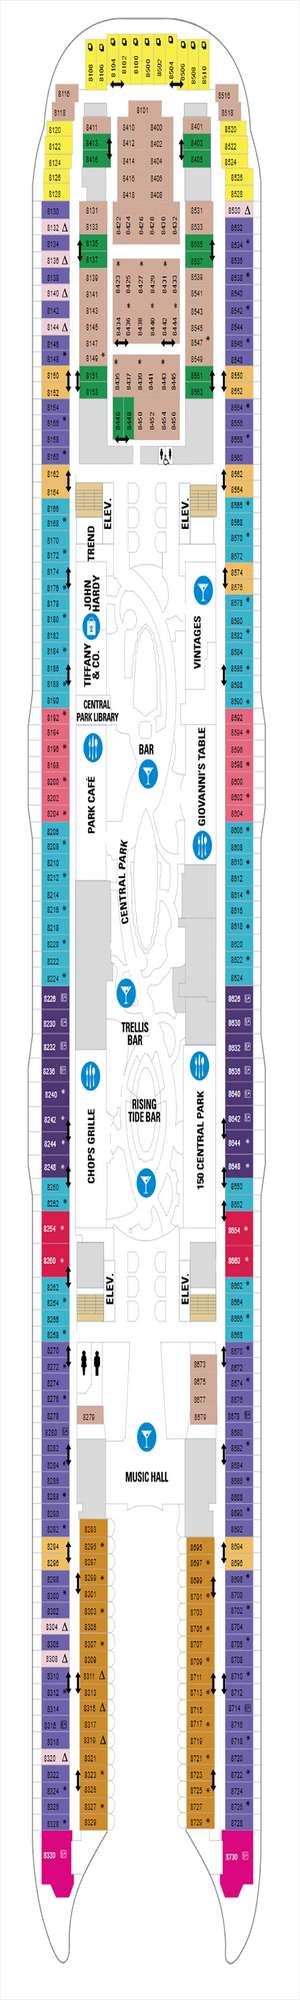 Deck plan for Oasis of the Seas